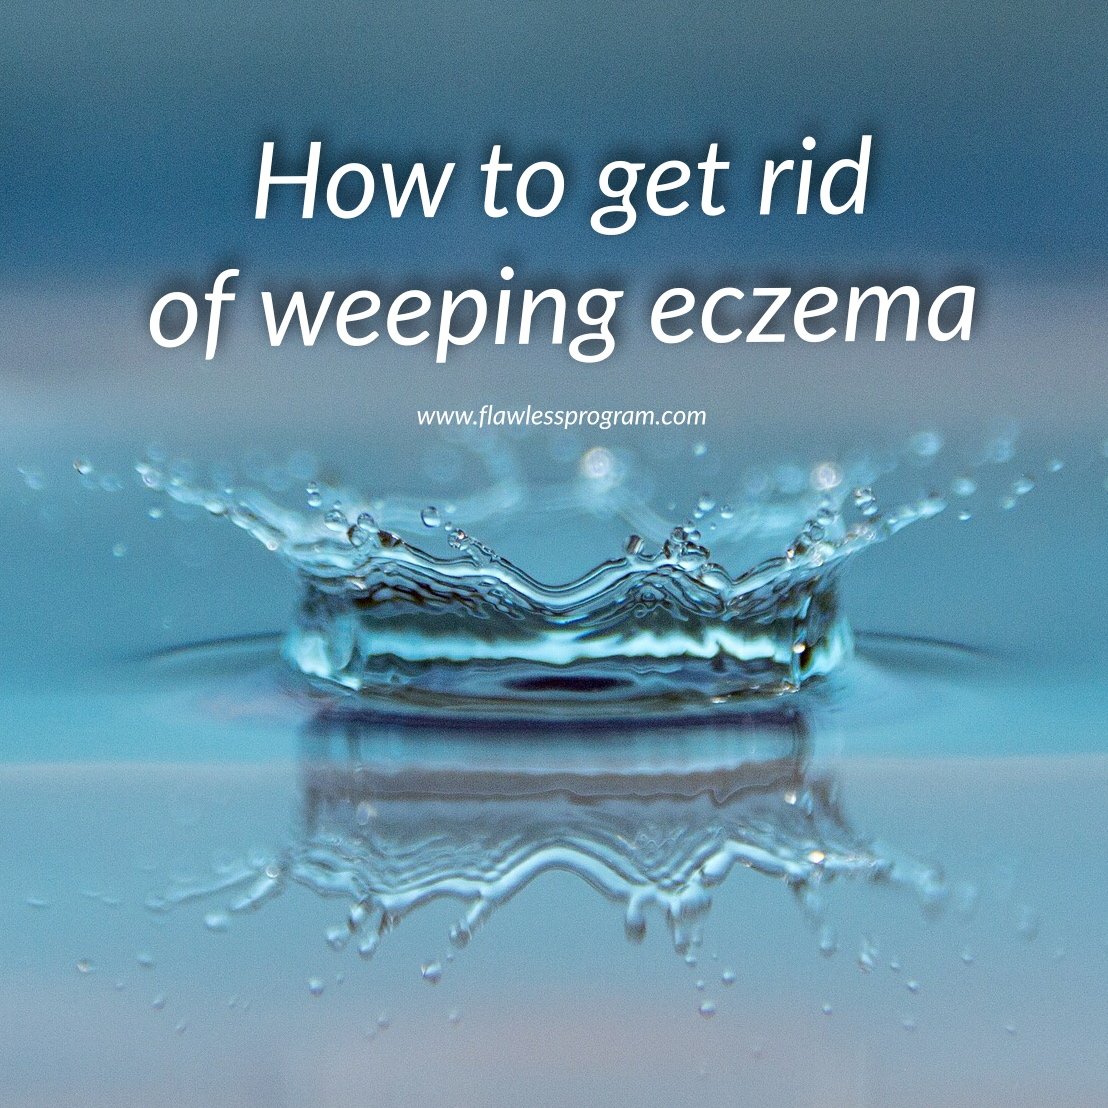 How to get rid of weeping eczema